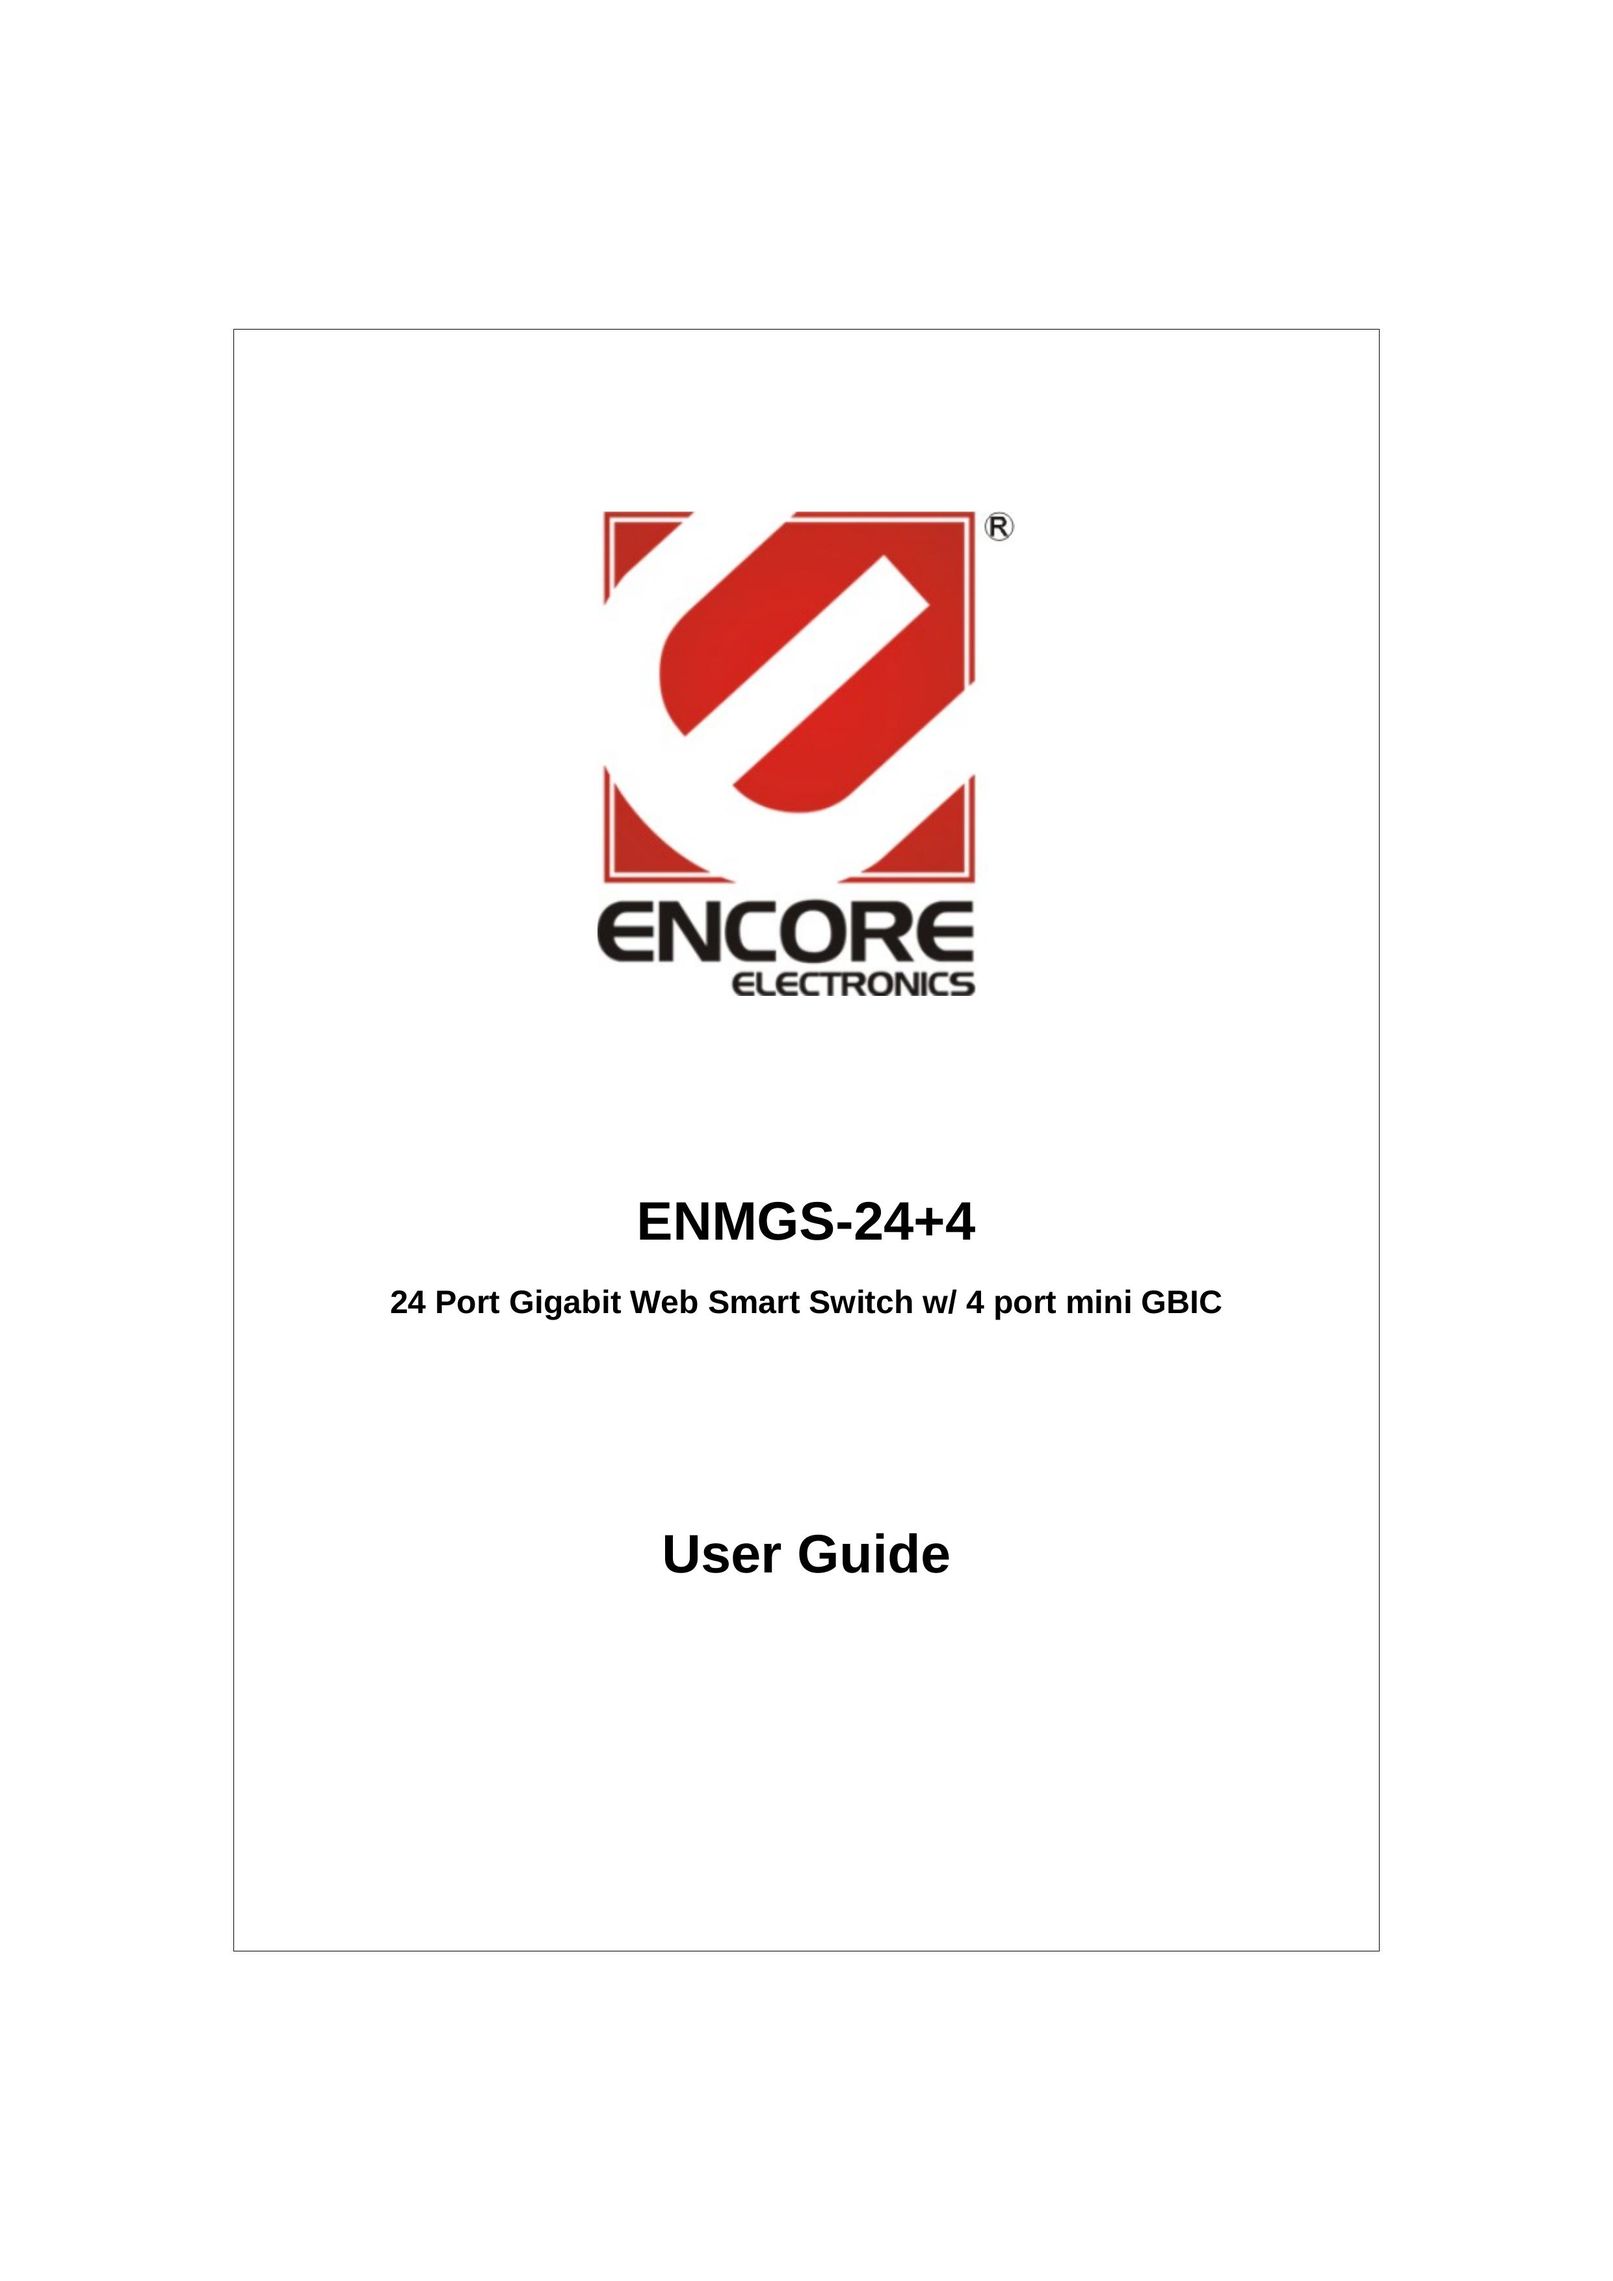 Encore electronic ENMGS-24+4 Switch User Manual